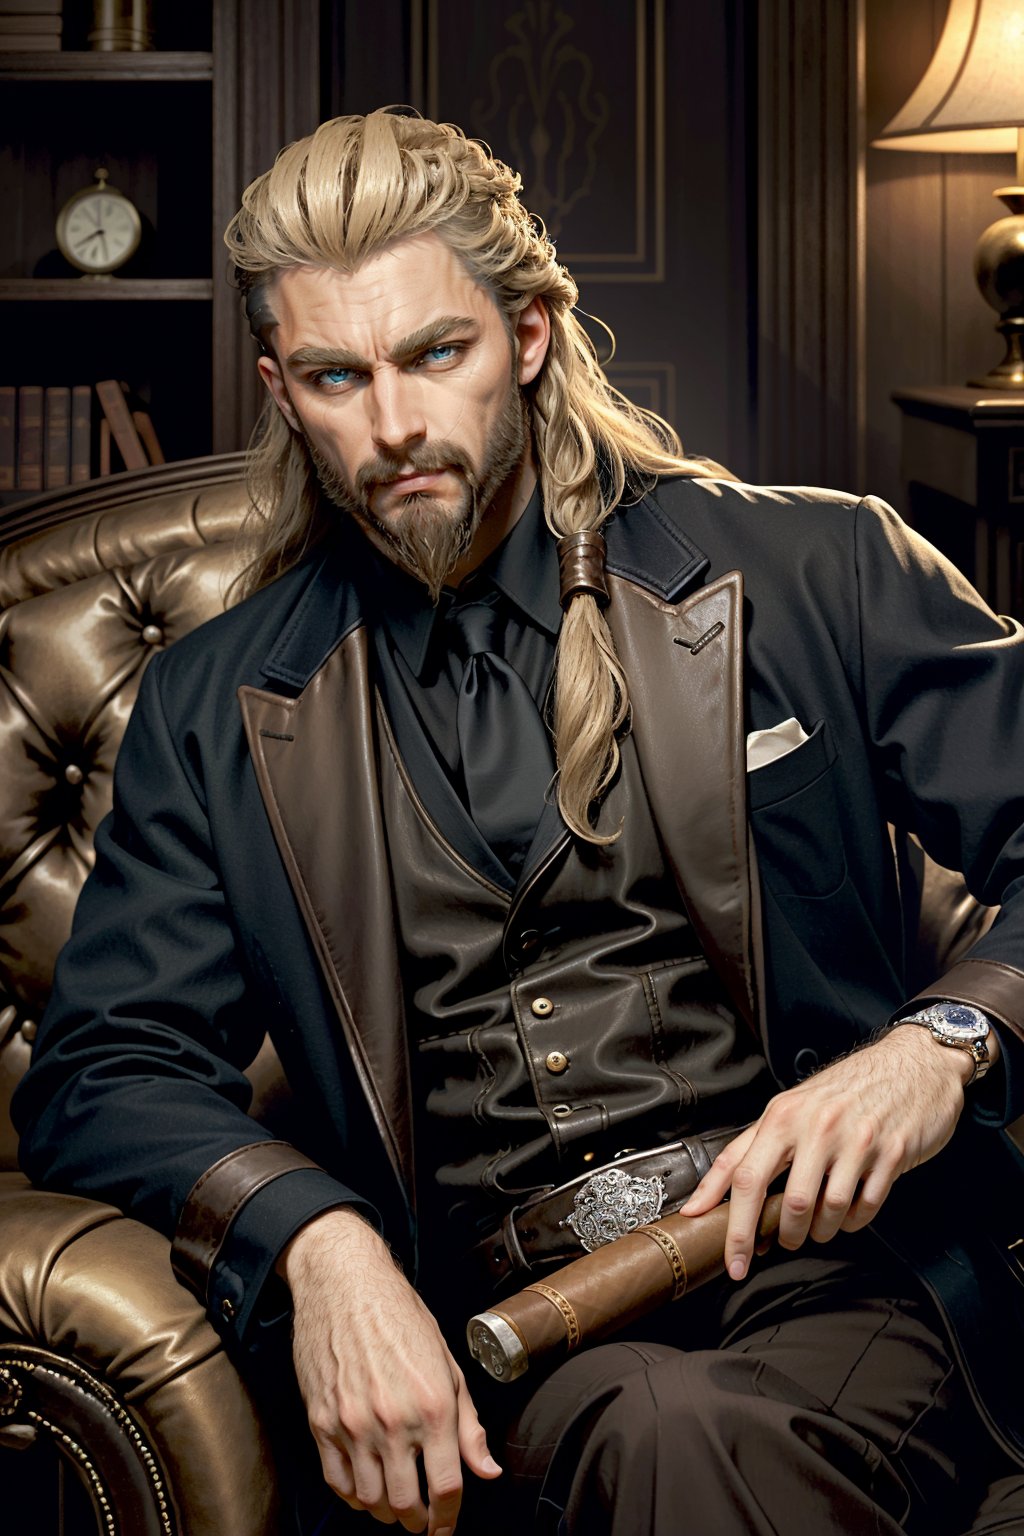 ((masterpiece, best quality))
AssaMaleEivor, 1boy, solo, long hair, beard, blonde hair, blue eyes, Within a vintage cigar lounge, polished gentleman's attire, rich mahogany and leather surroundings, confidently holding a cigar with a smoldering gaze
